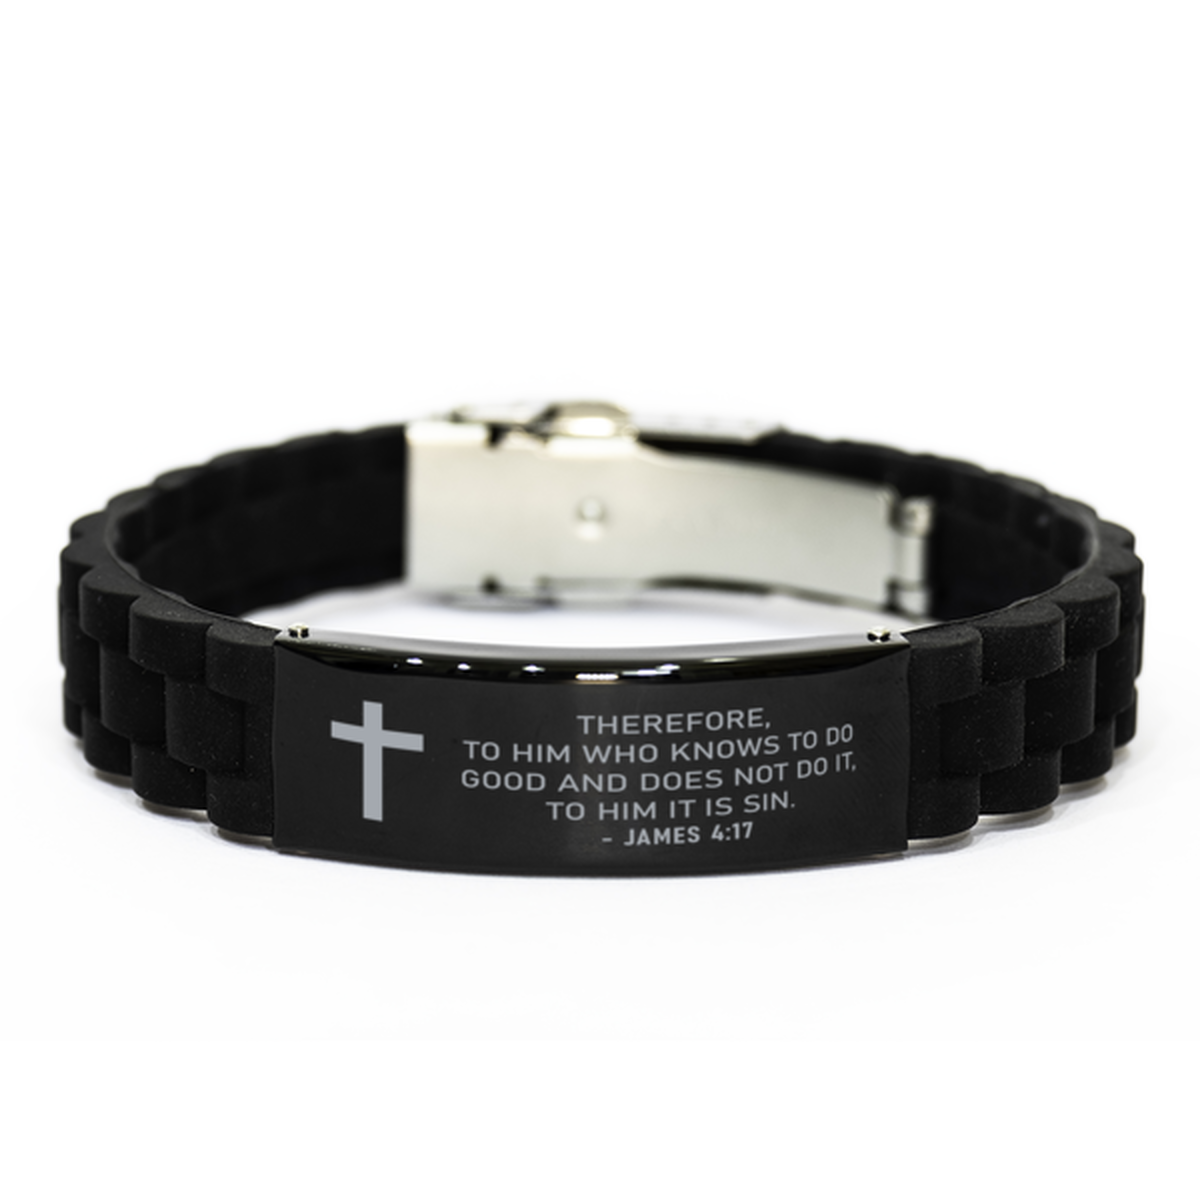 Bible Verse Black Bracelet,, James 4:17 Therefore, To Him Who Knows To Do Good And Does, Inspirational Christian Gifts For Men Women